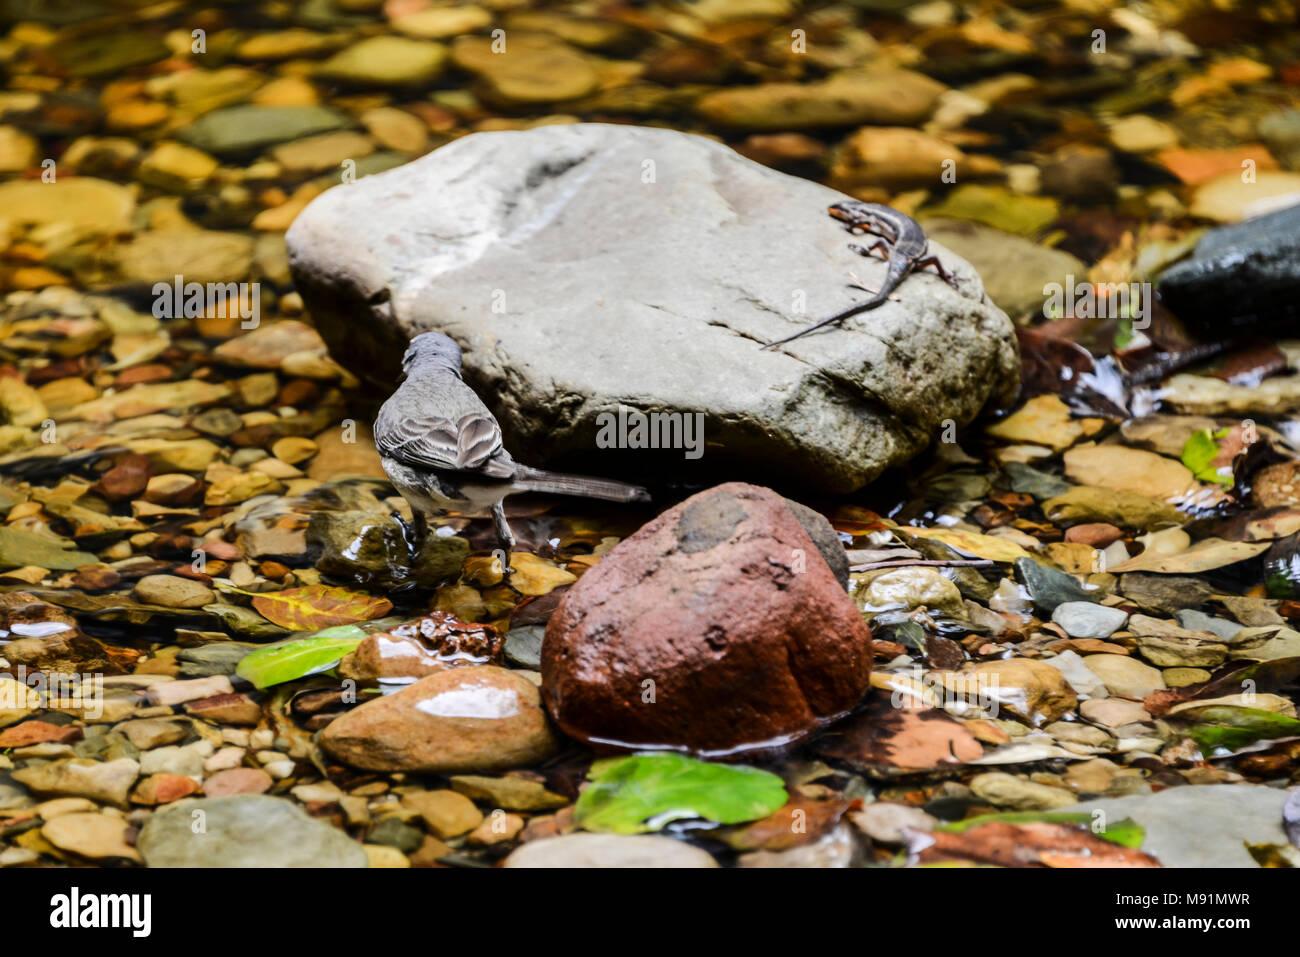 A Cape wagtail (Motacilla capensis) in a stream with a red-sided skink (Trachylepis homalocephala) on a rock near by Stock Photo